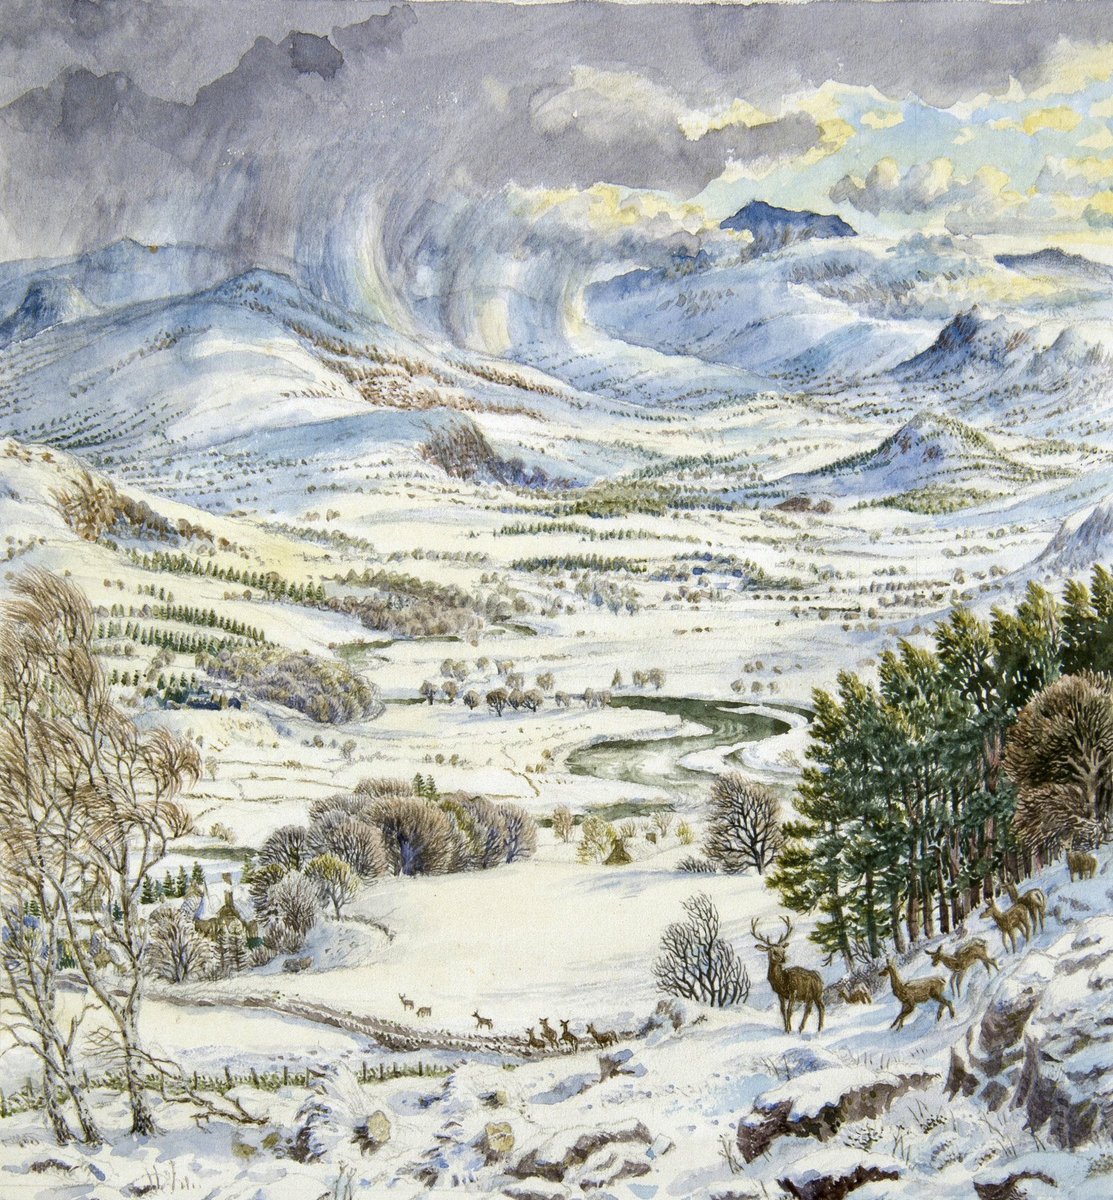 Other work of the Ladybird artists. The Spey Valley Artist: SR Badmin